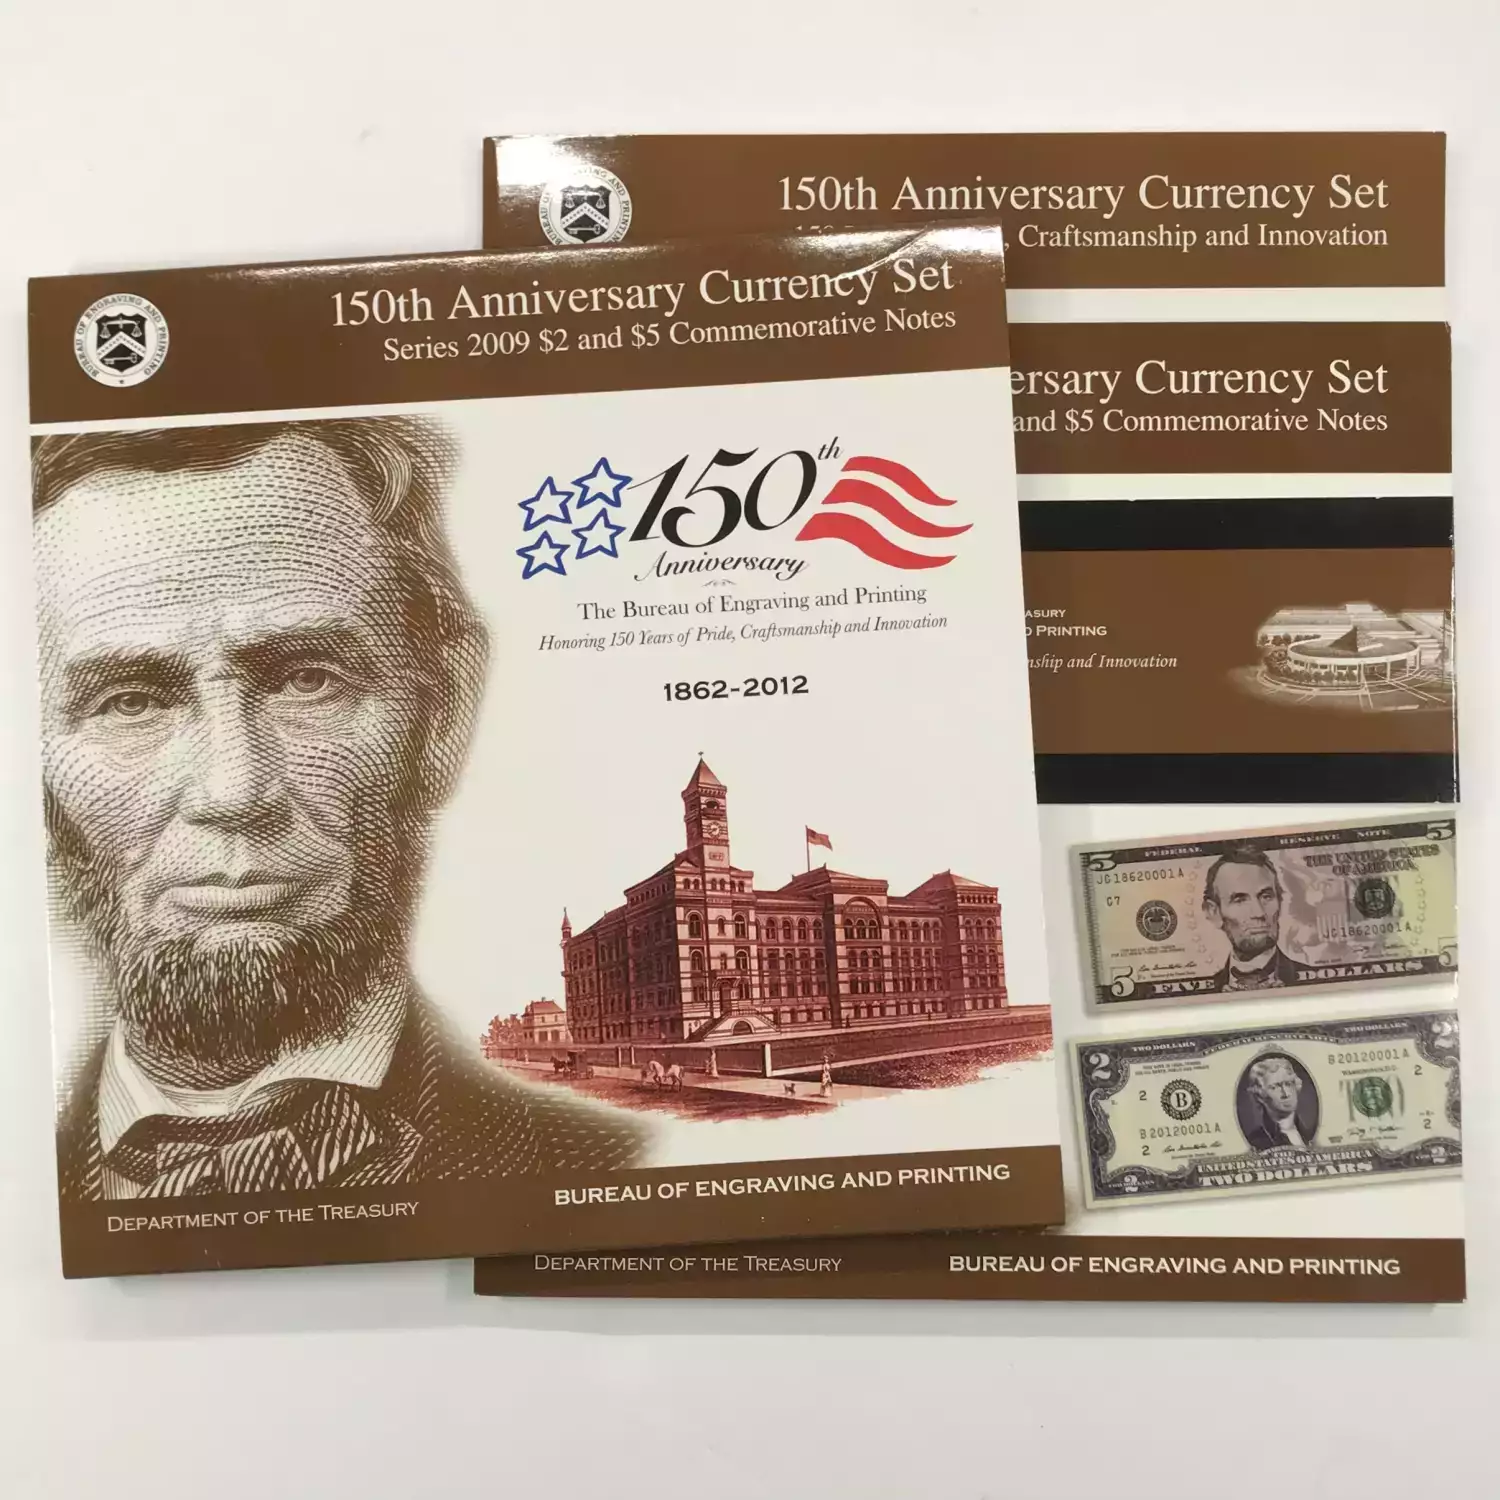 2012 BEP 150th Anniversary Currency Set - Series 2009 $2 & $5 FRN Notes